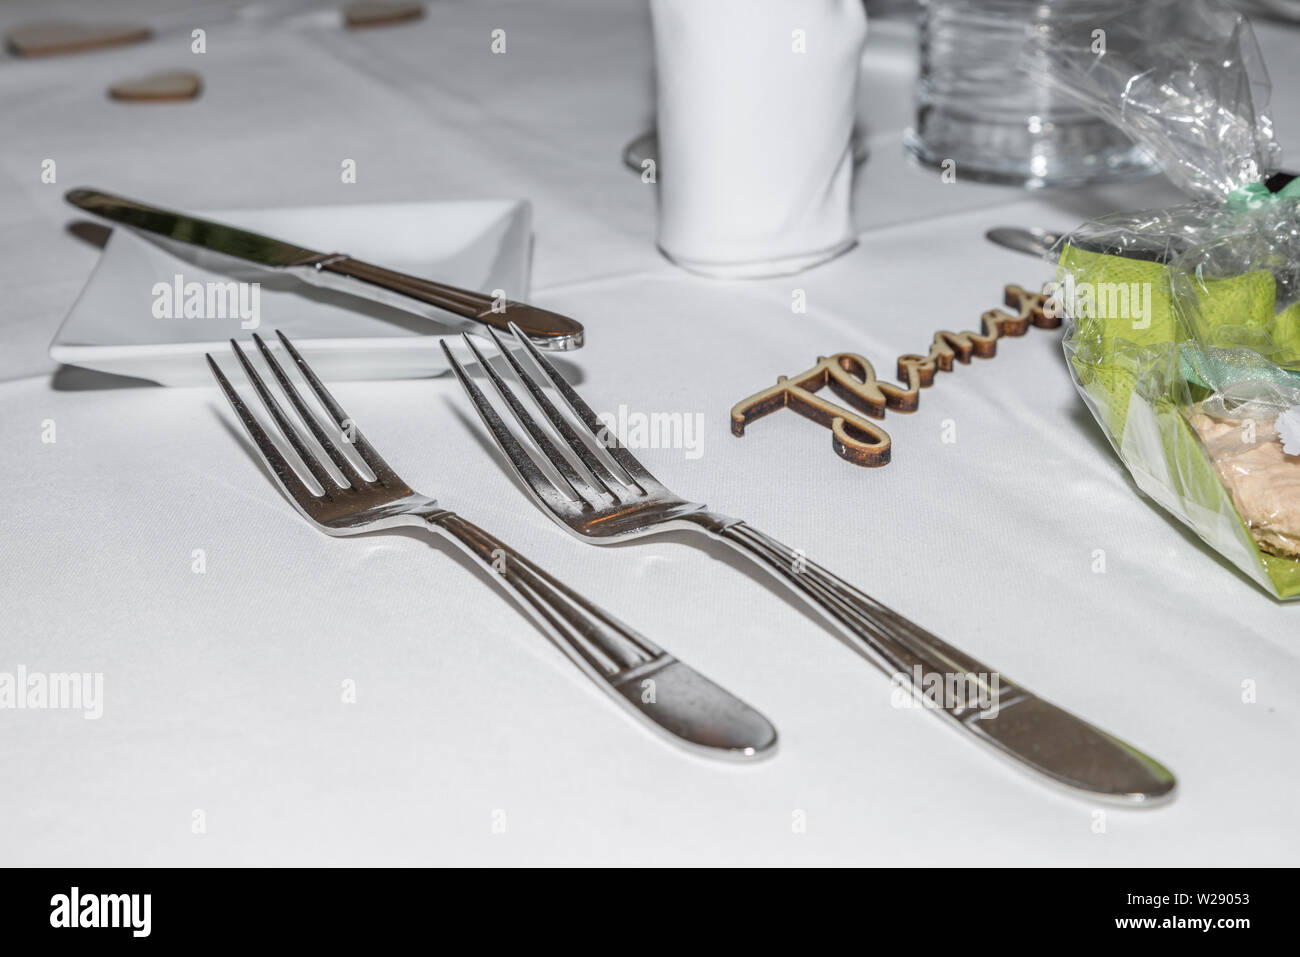 Table decoration of a wedding with glasses of cutlery and the name Thomas, Germany Stock Photo